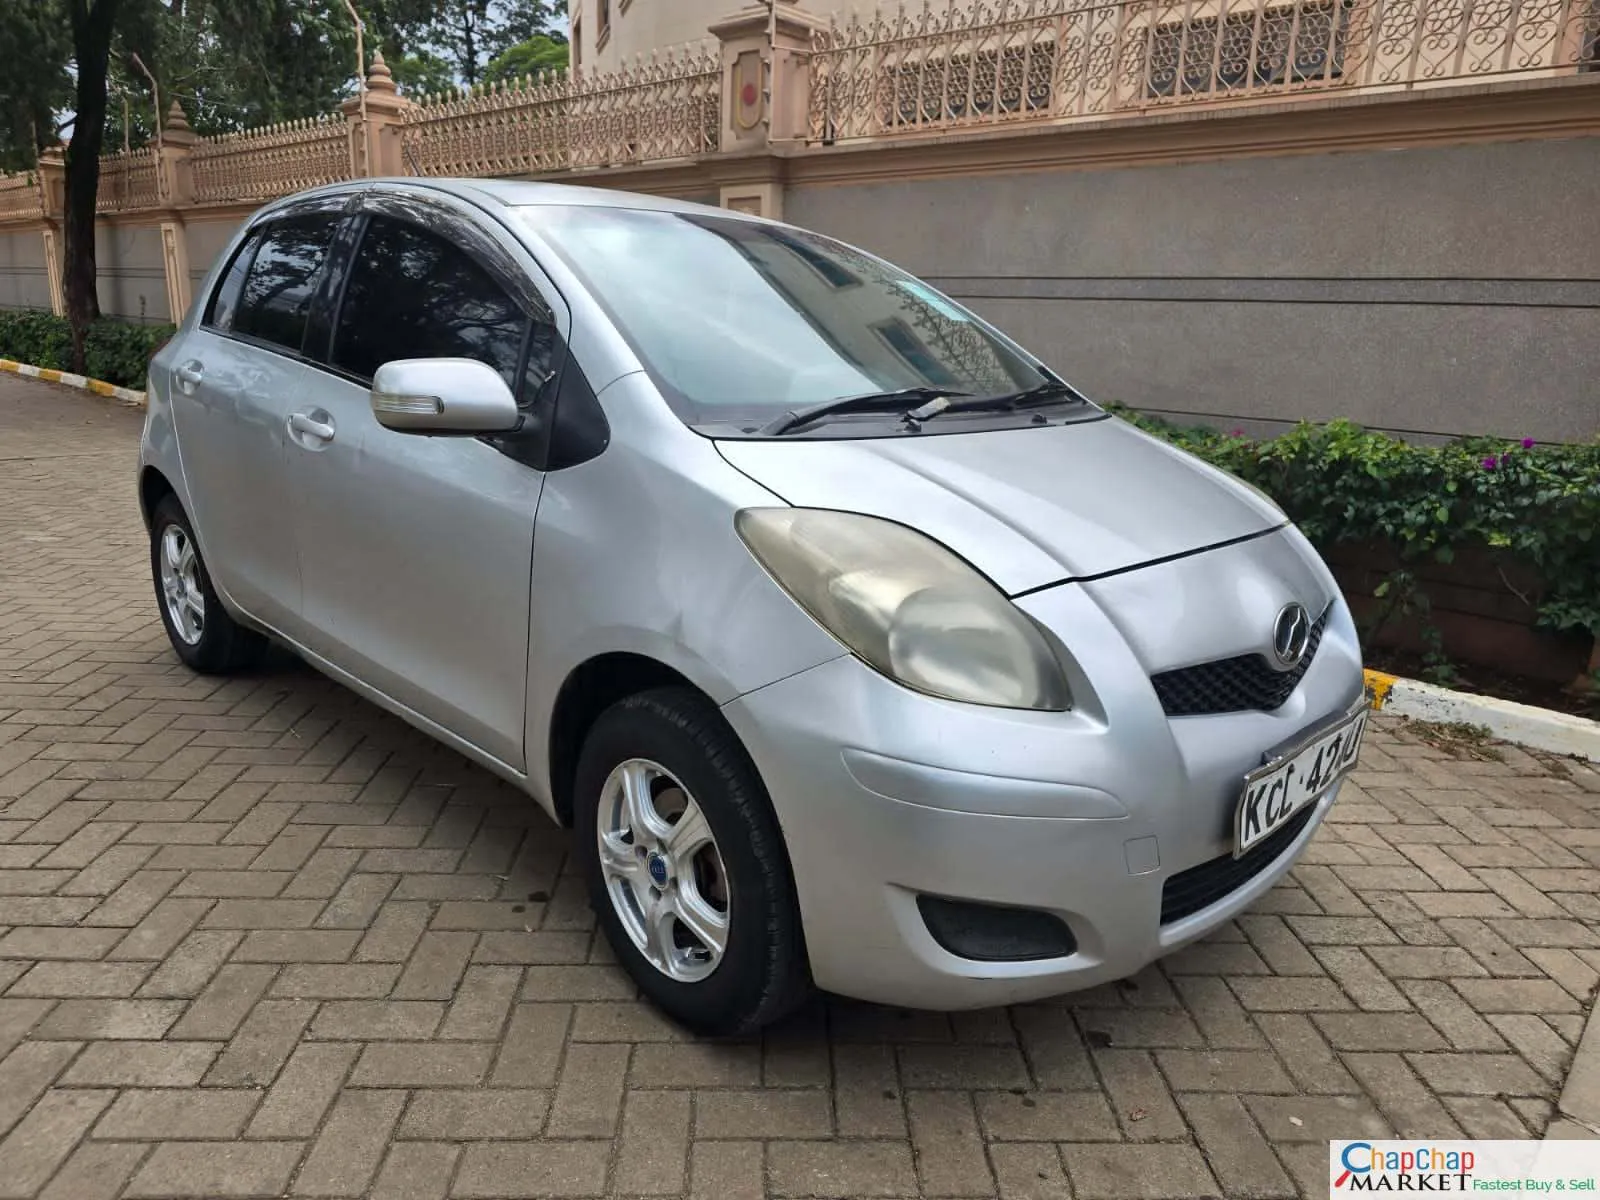 Toyota Vitz NEW SHAPE 1300cc You PAY 30% Deposit INSTALLMENTS Trade in Ok New hire purchase installments